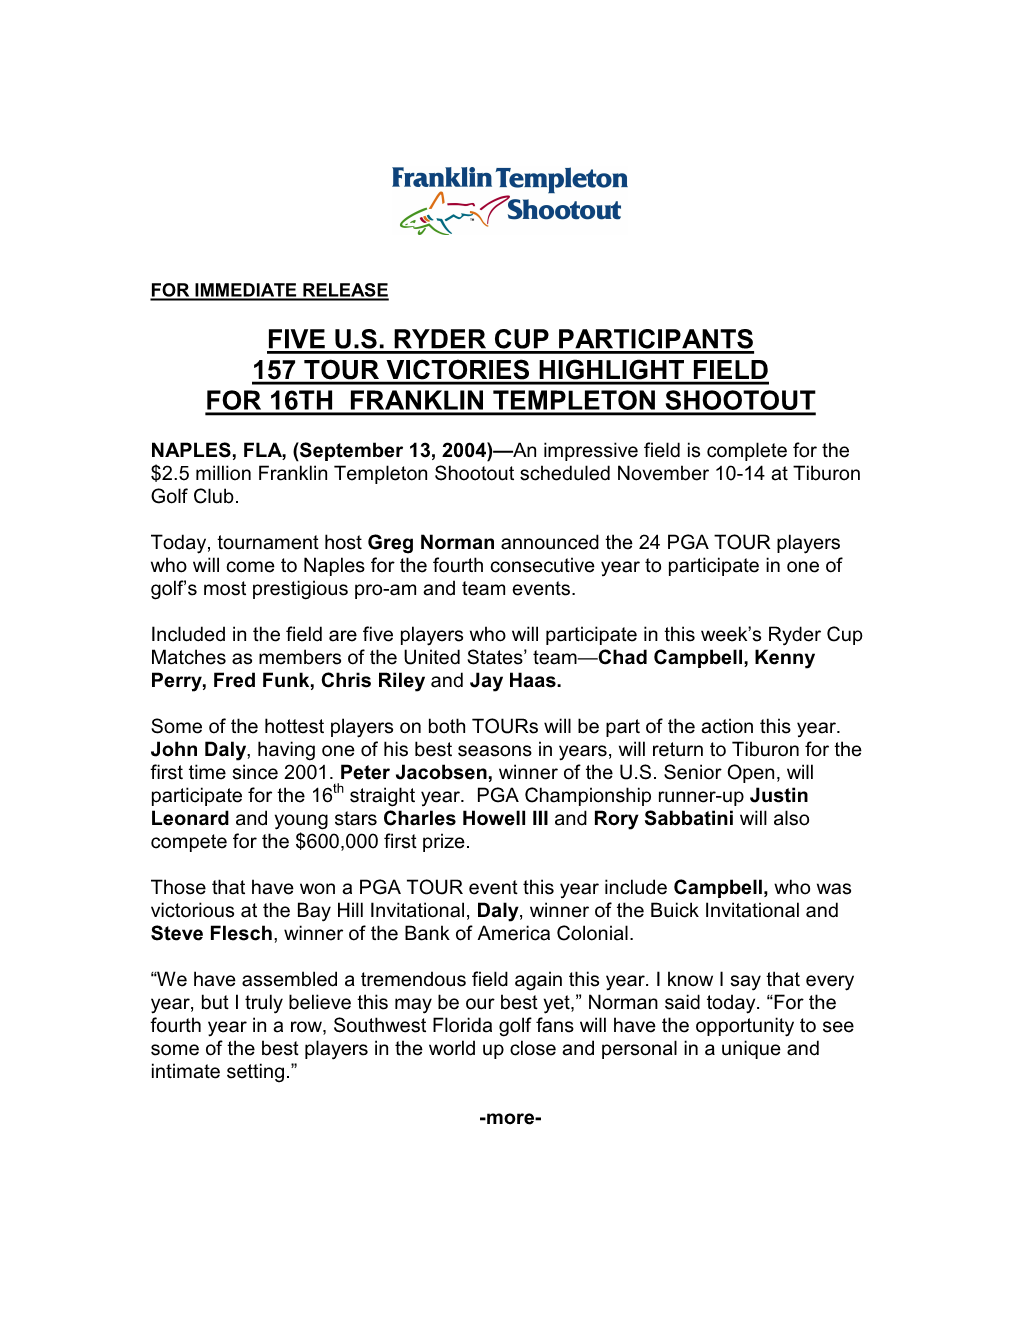 Five U.S. Ryder Cup Participants 157 Tour Victories Highlight Field for 16Th Franklin Templeton Shootout